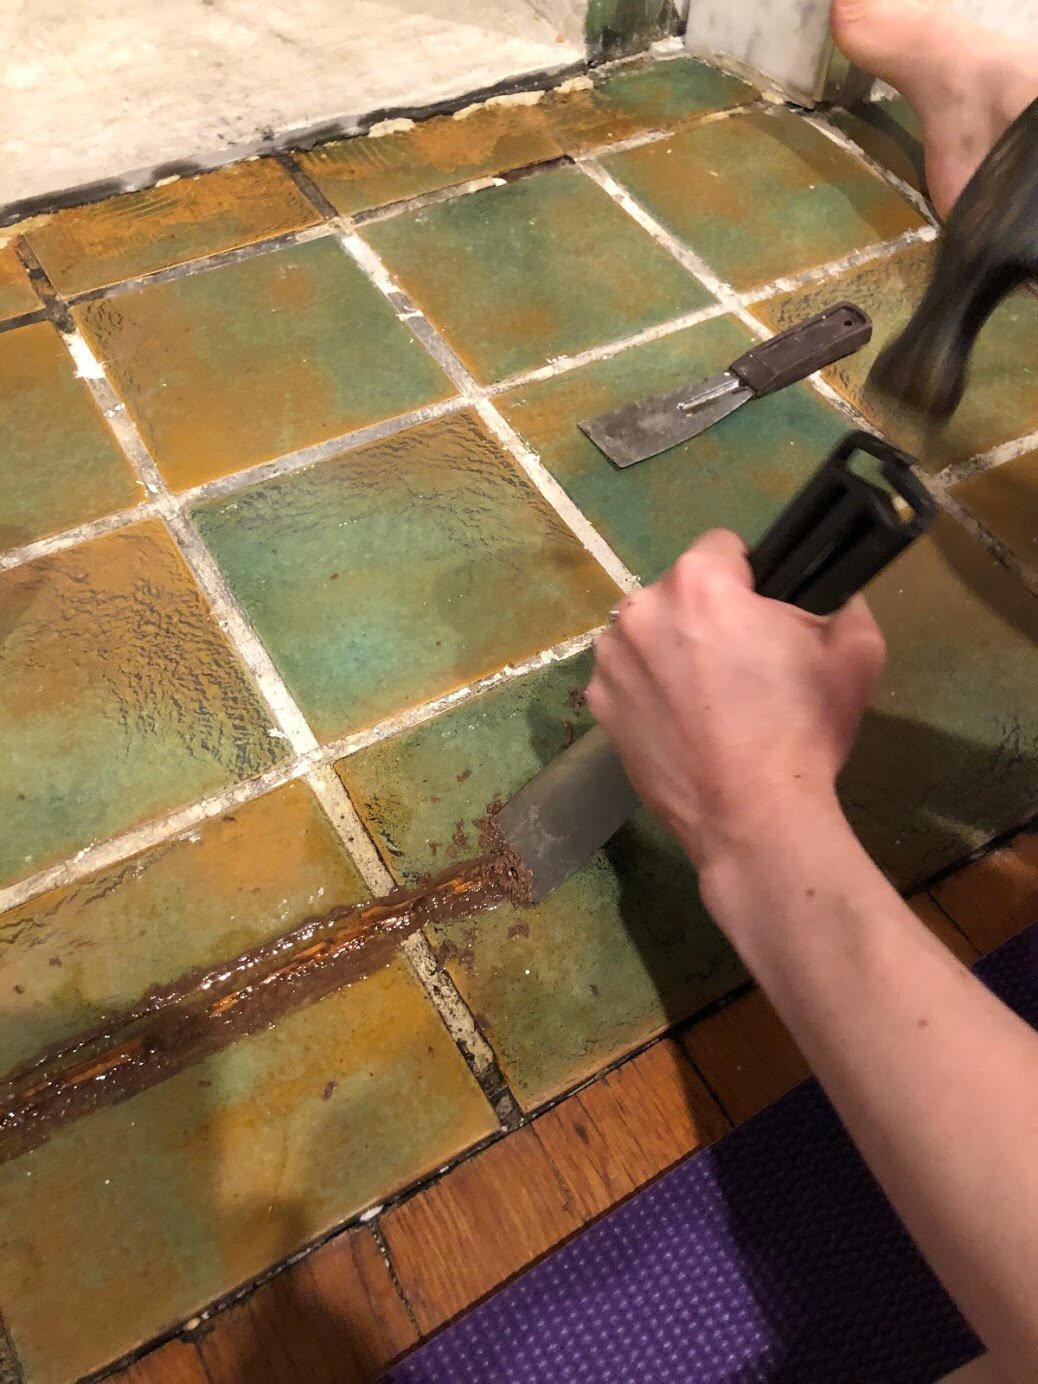  Using a putty knife and hammer, gently scrape off the glue. 